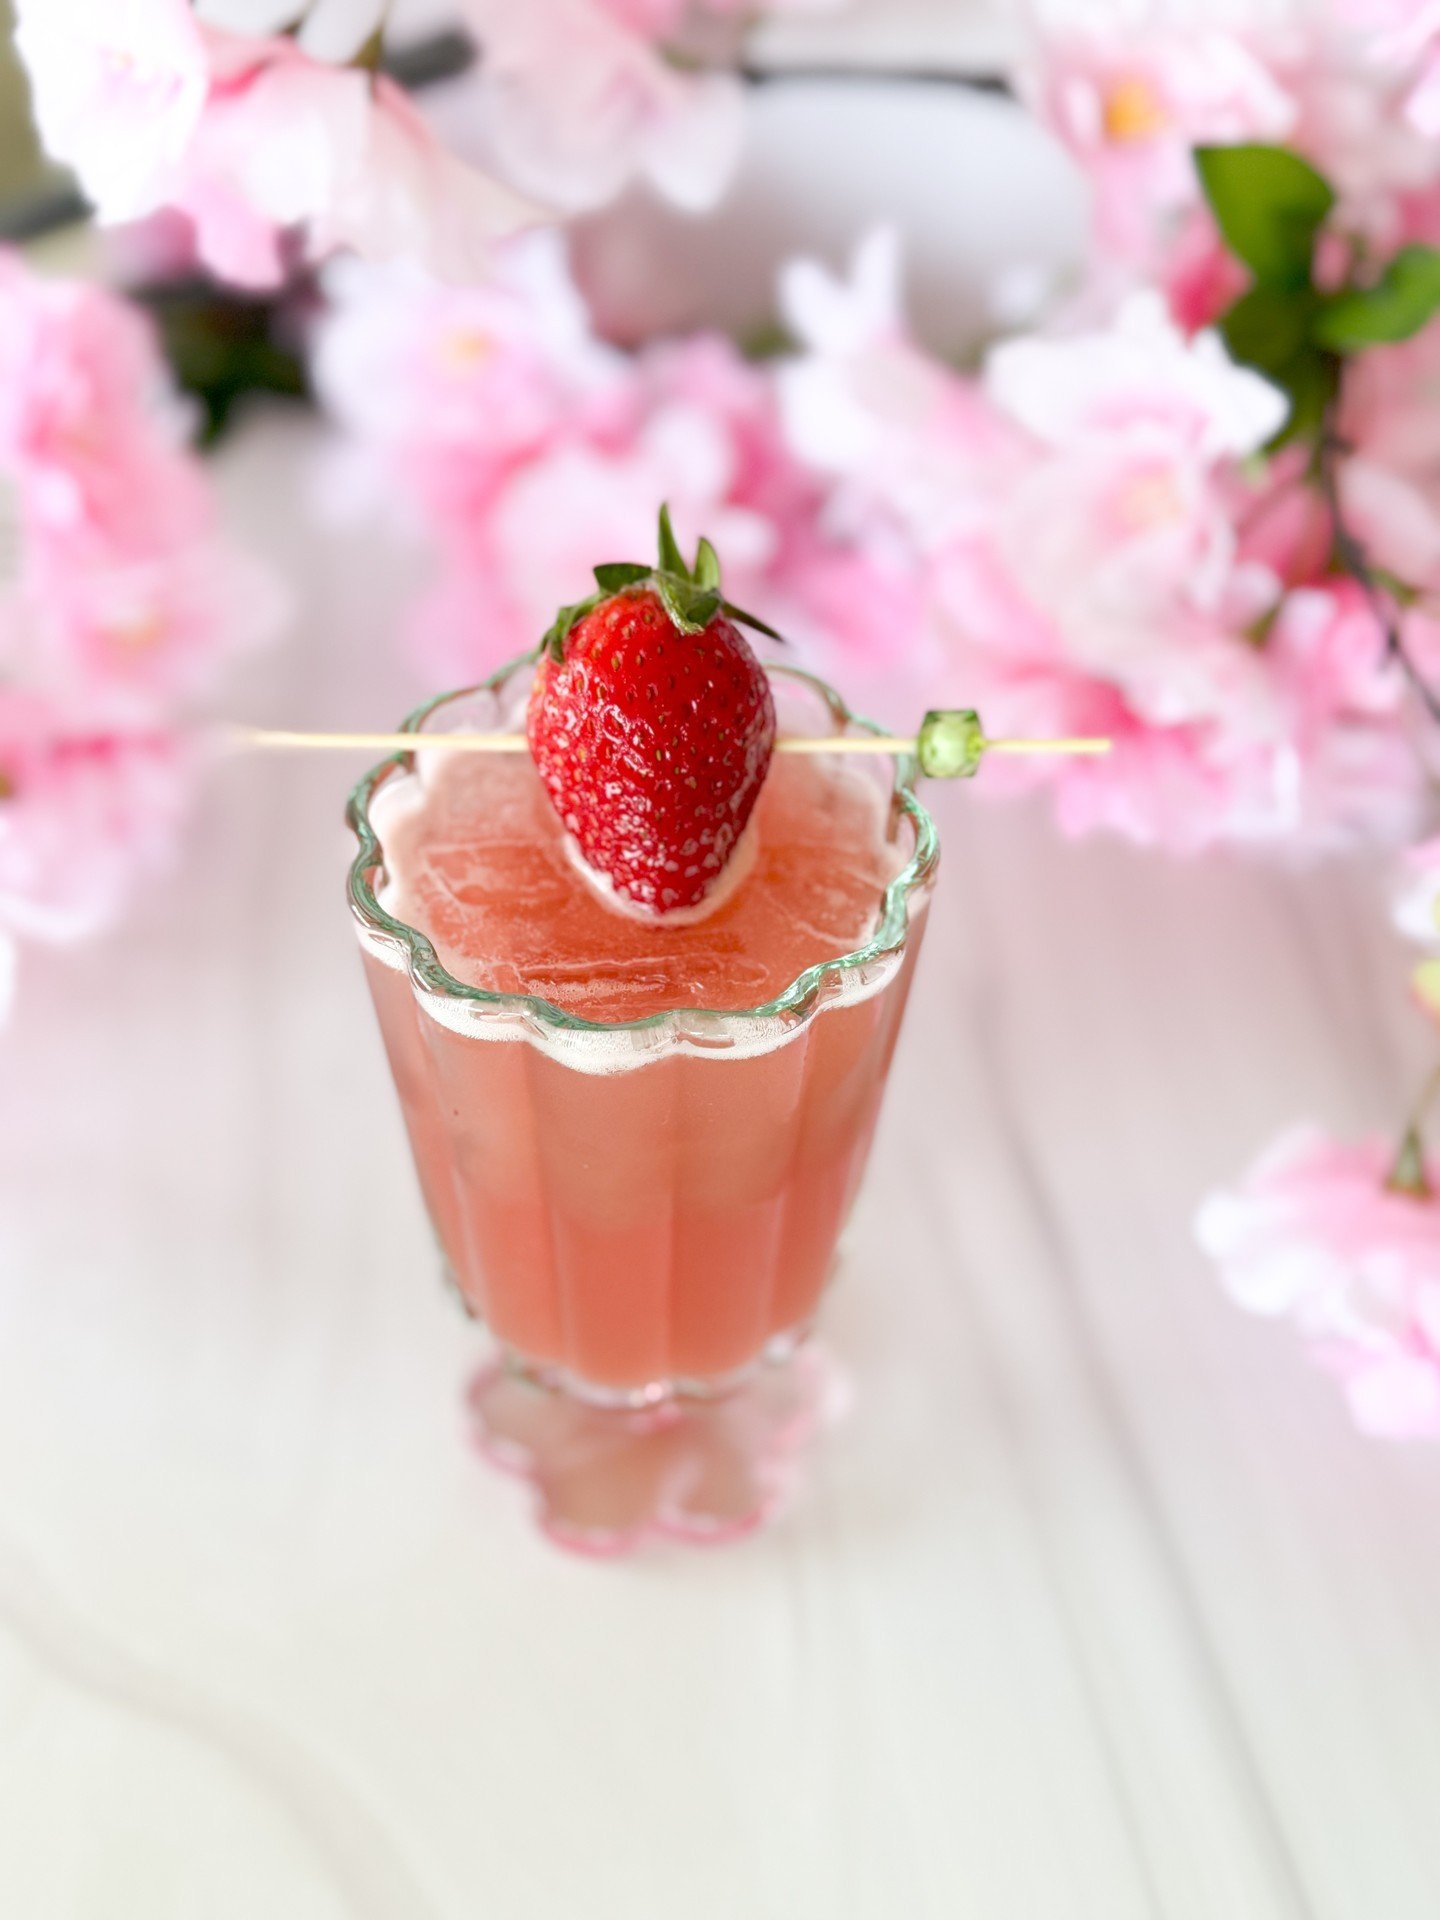 Join us this week for a specialty cocktail menu just for Apple Blossom! You'll find the following Blossom themed drinks: Appletini, Spiked Strawberry Lemonade, Pink French Martini, Pink Margarita, Princess Shot, and Gold Rush.

In case you missed the